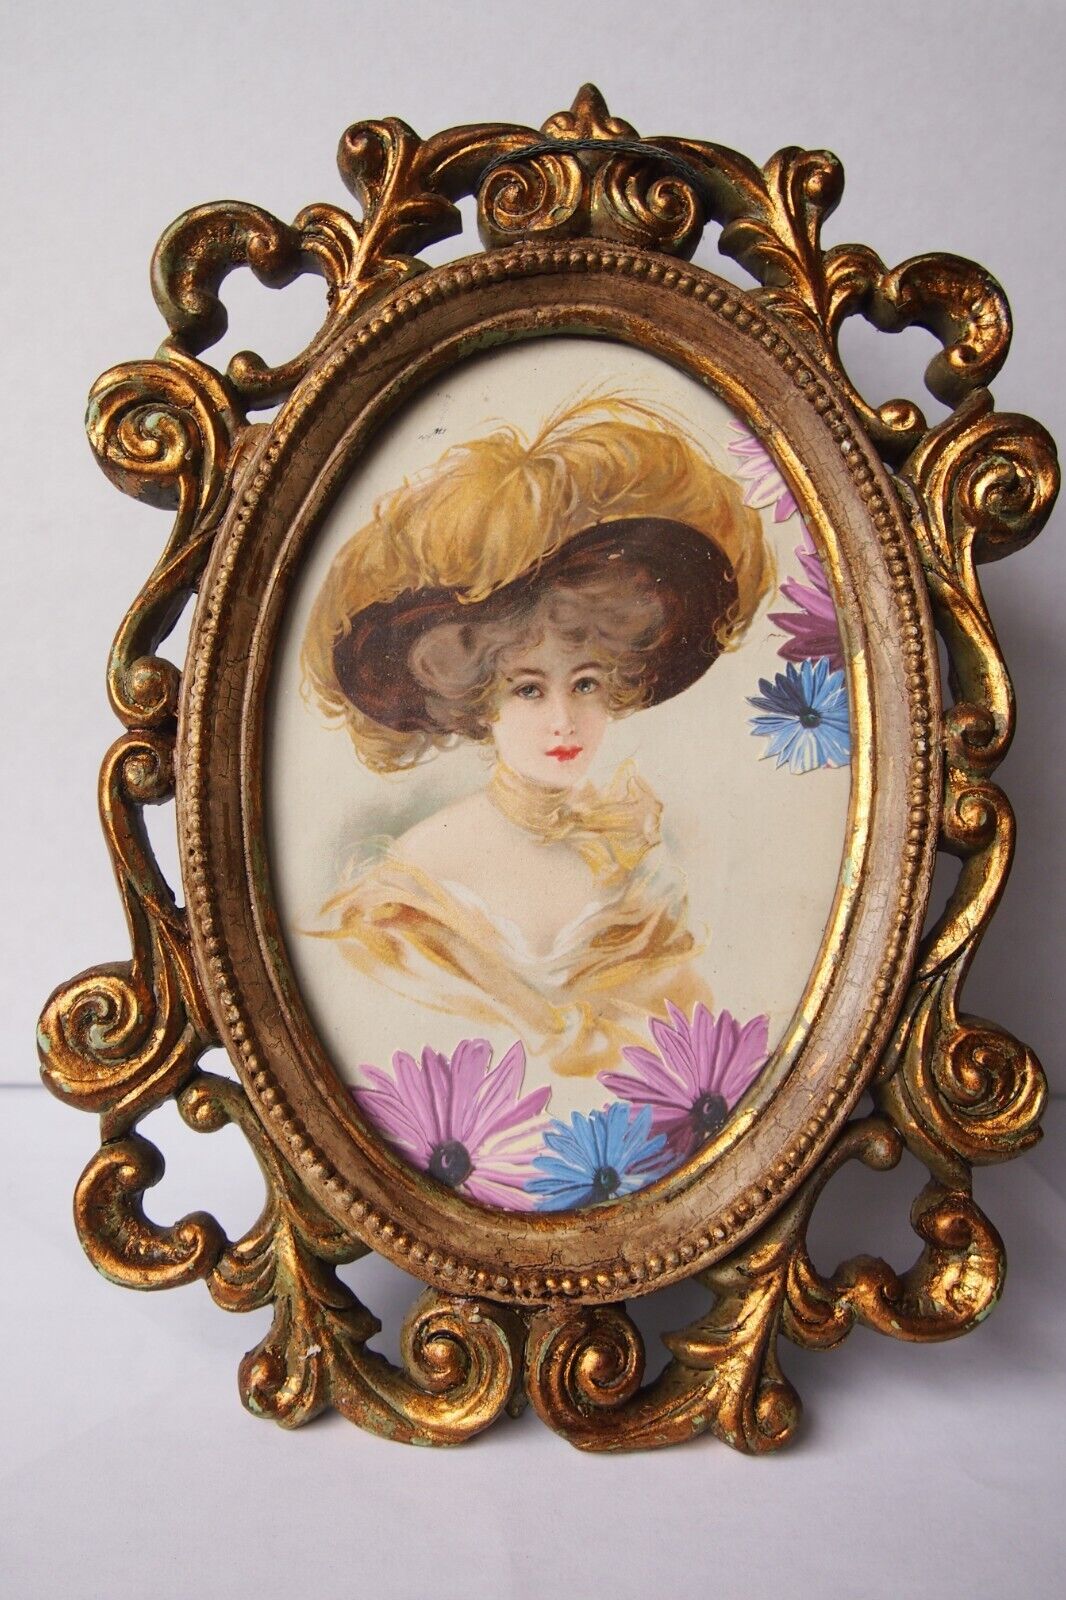 Gorgeous Antique Victorian Gold Gilt Wood Frame, Oval, Ornate, Pretty Lady